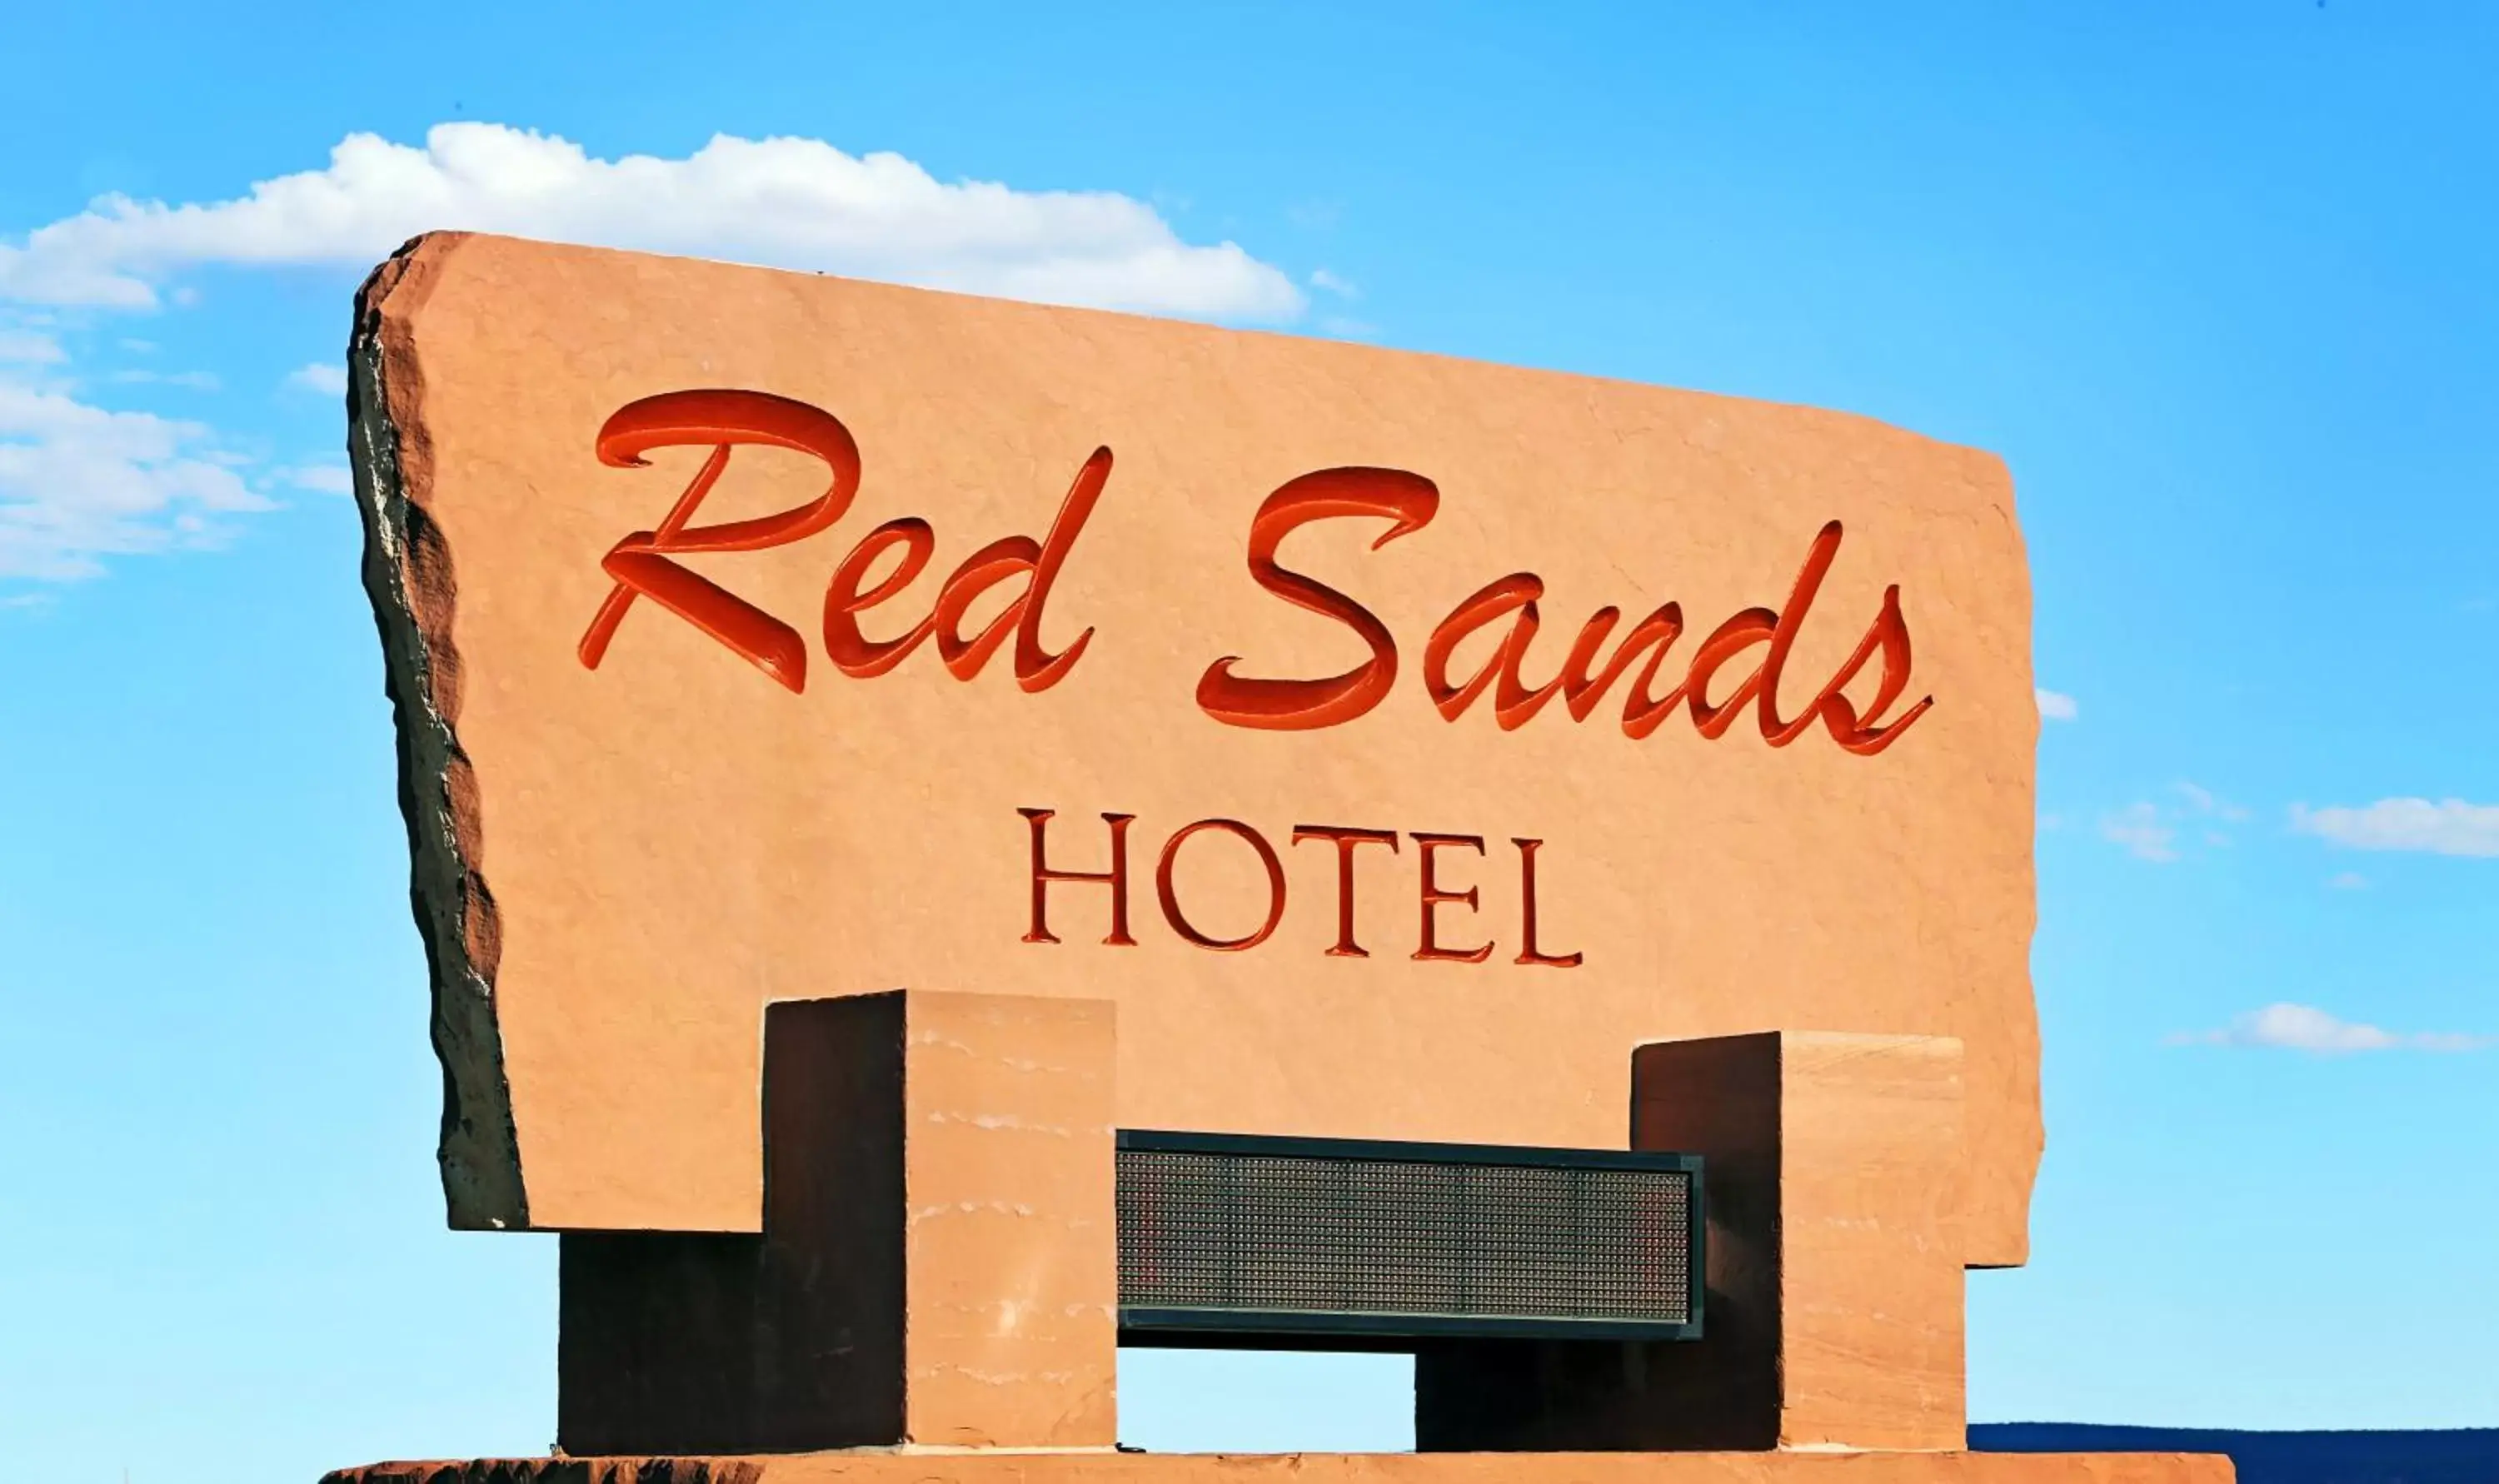 Decorative detail in Red Sands Hotel